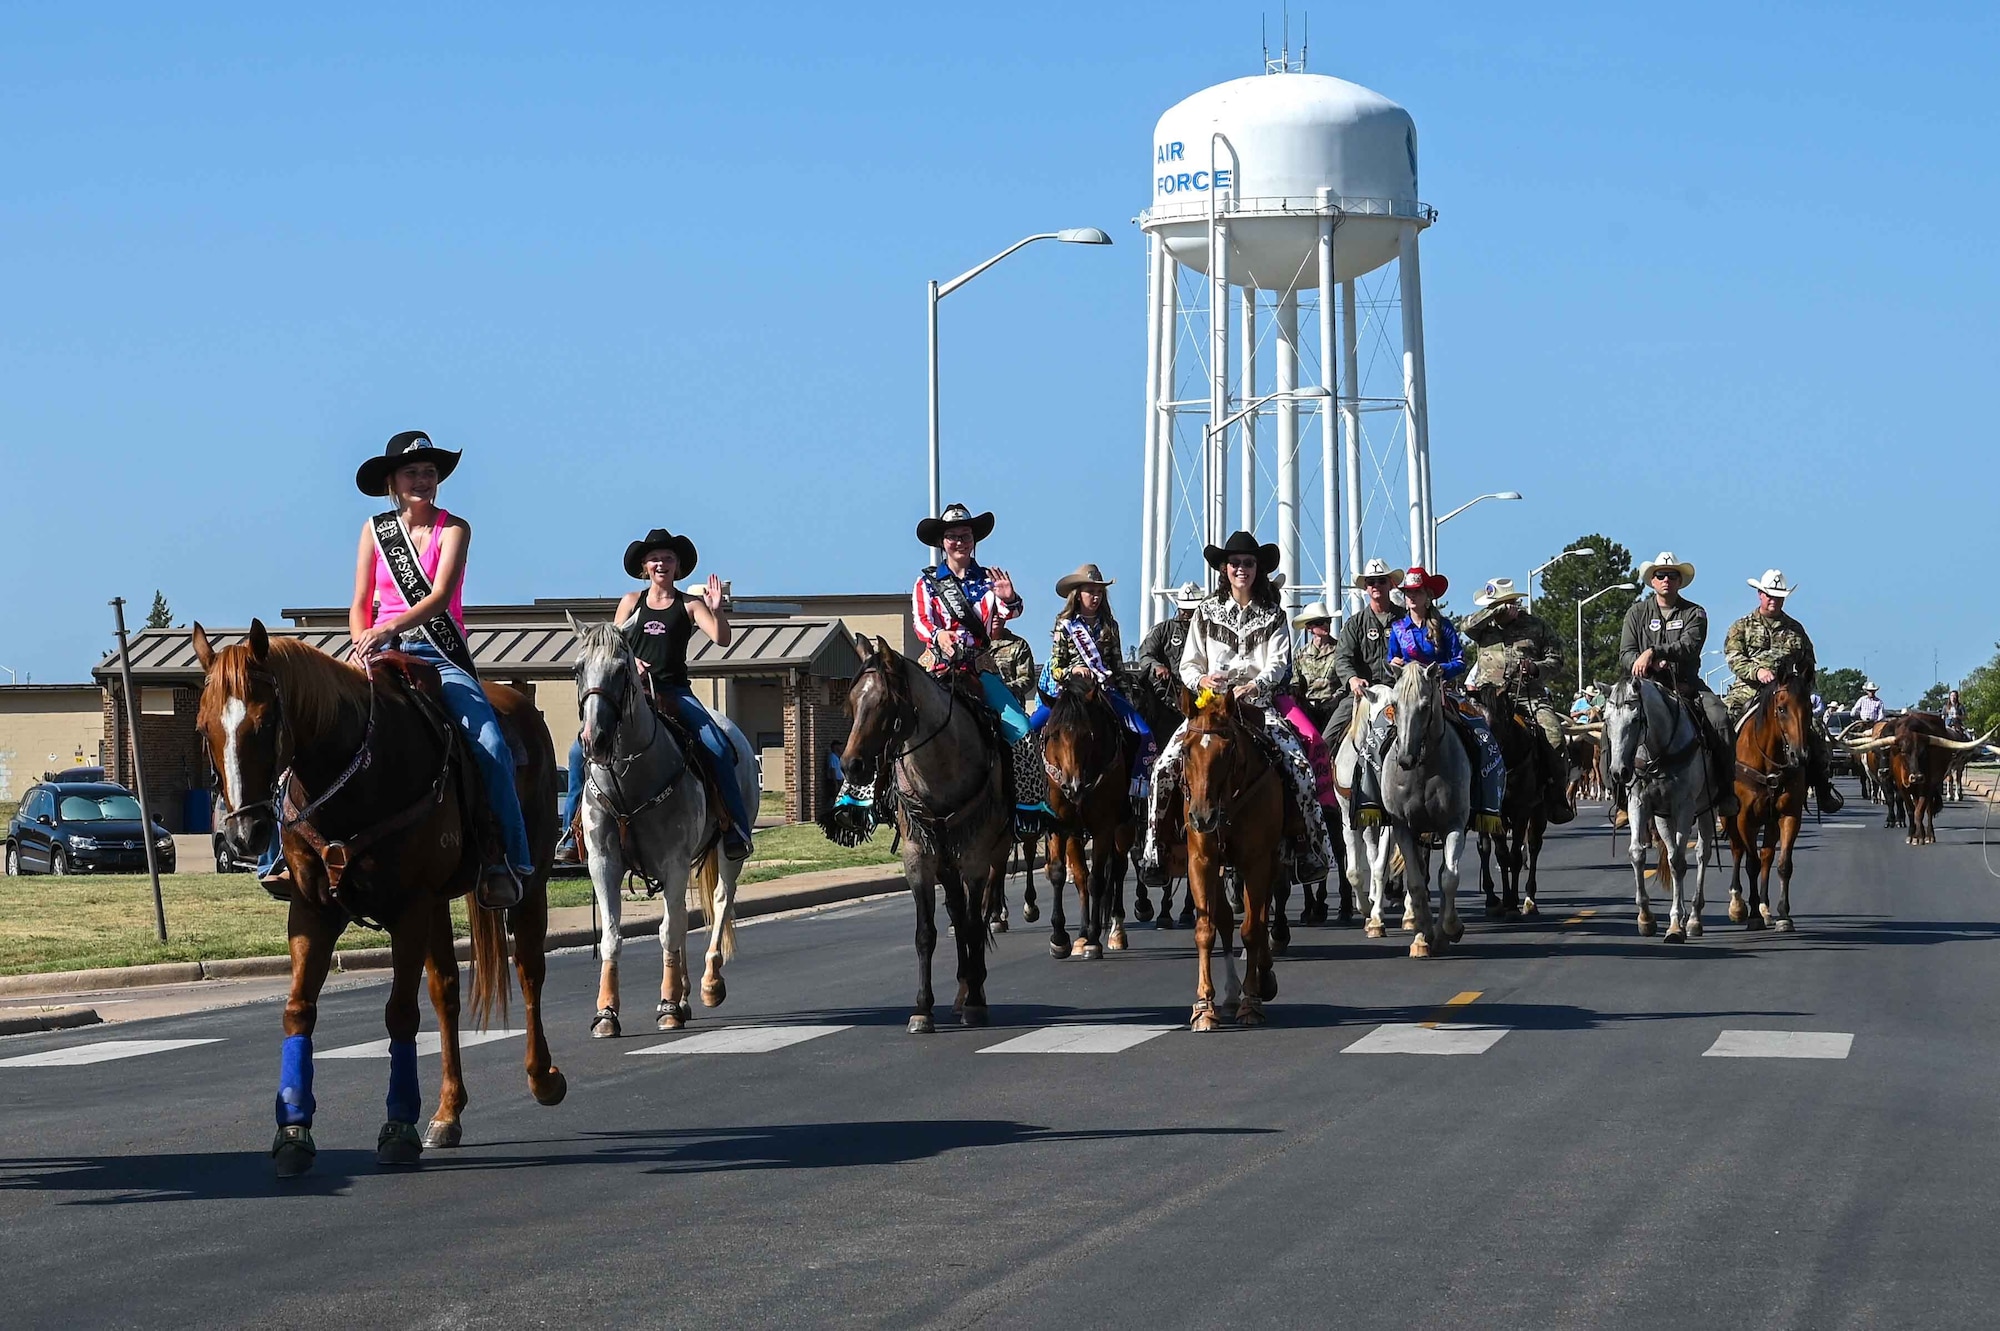 The 2023 Miss Oklahoma Rodeo Queens wave at Airmen and families during the 25th Annual Cattle Drive at Altus Air Force Base (AFB), Oklahoma, Aug. 24, 2023. Altus AFB works with the local community to host the cattle drive annually. (U.S. Air Force photo by Airman 1st Class Kari Degraffenreed)